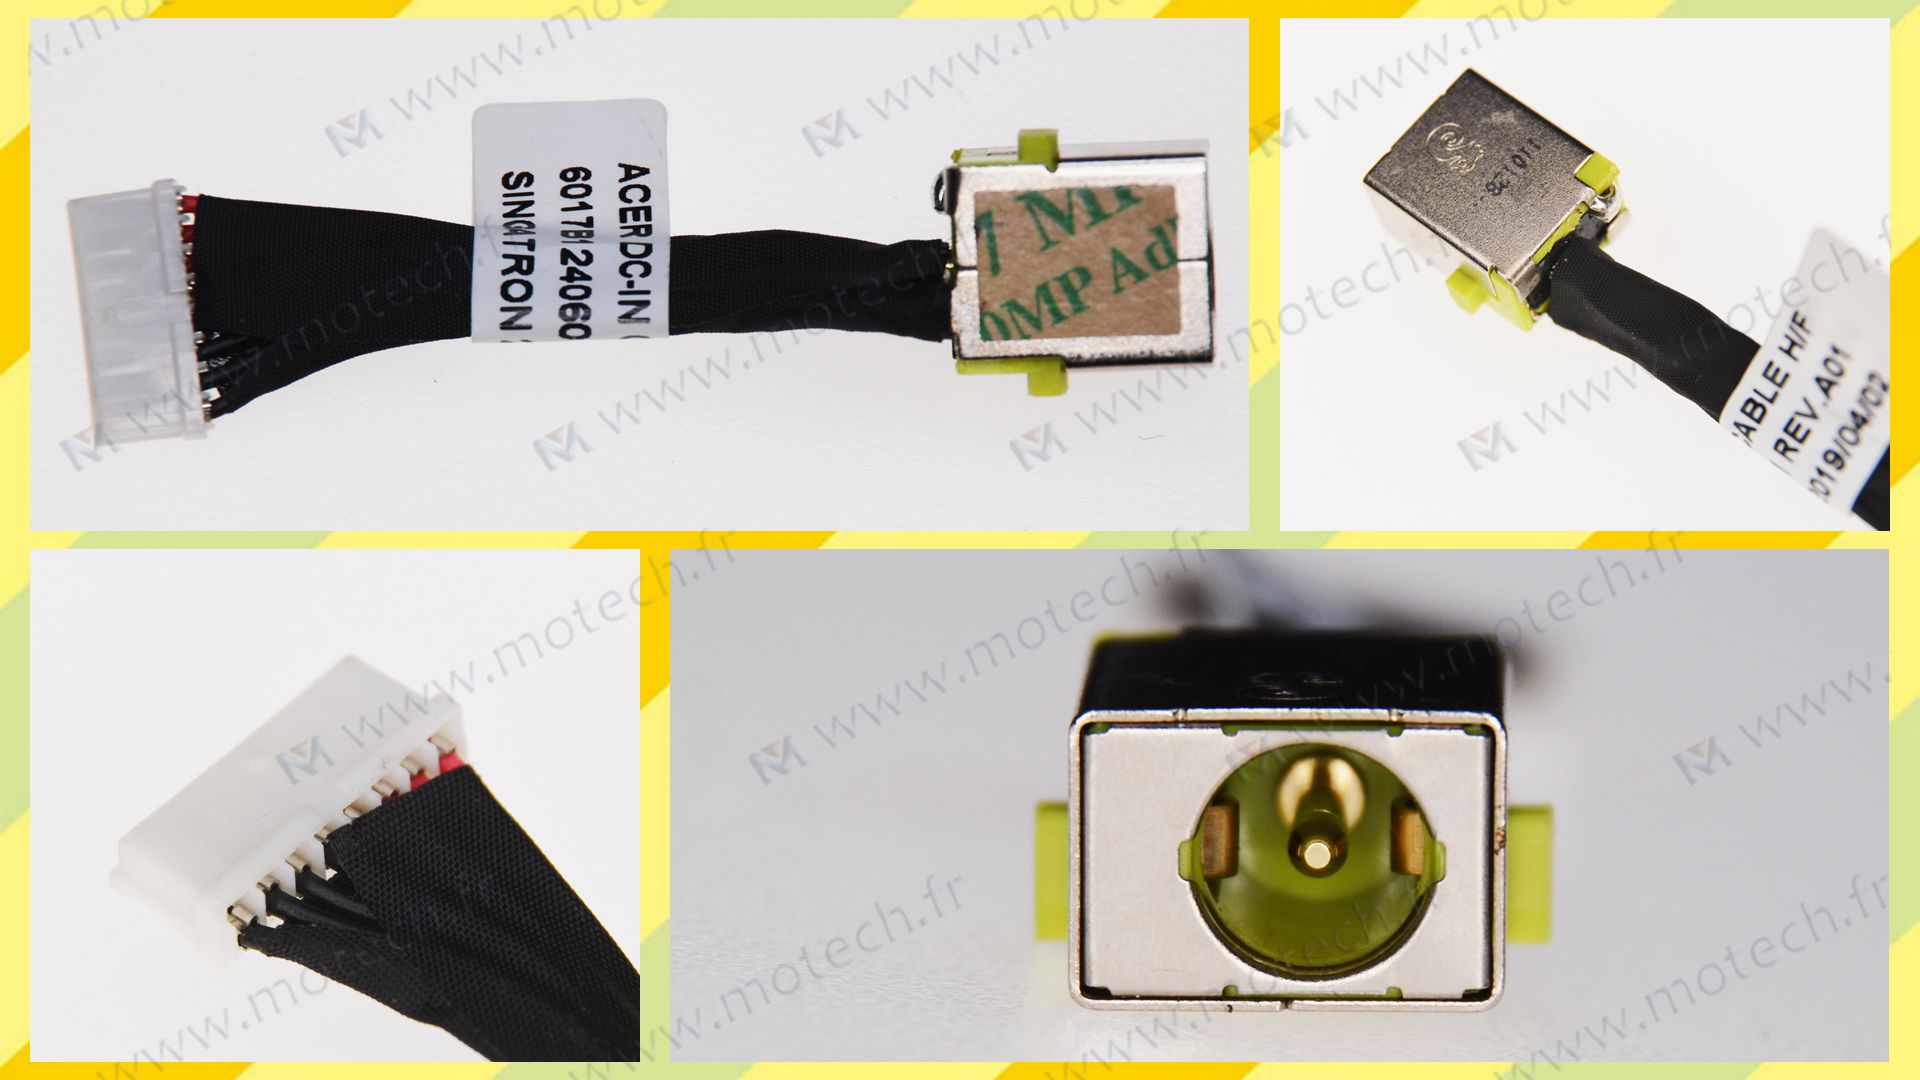 Acer Helios 300 PH315-52 charging connector, Acer Helios 300 PH315-52 DC Power Jack, Acer Helios 300 PH315-52 DC IN Cable, Acer Helios 300 PH315-52 Power Jack, Acer Helios 300 PH315-52 plug, Acer Helios 300 PH315-52 Jack socket, Acer Helios 300 PH315-52 connecteur de charge, 